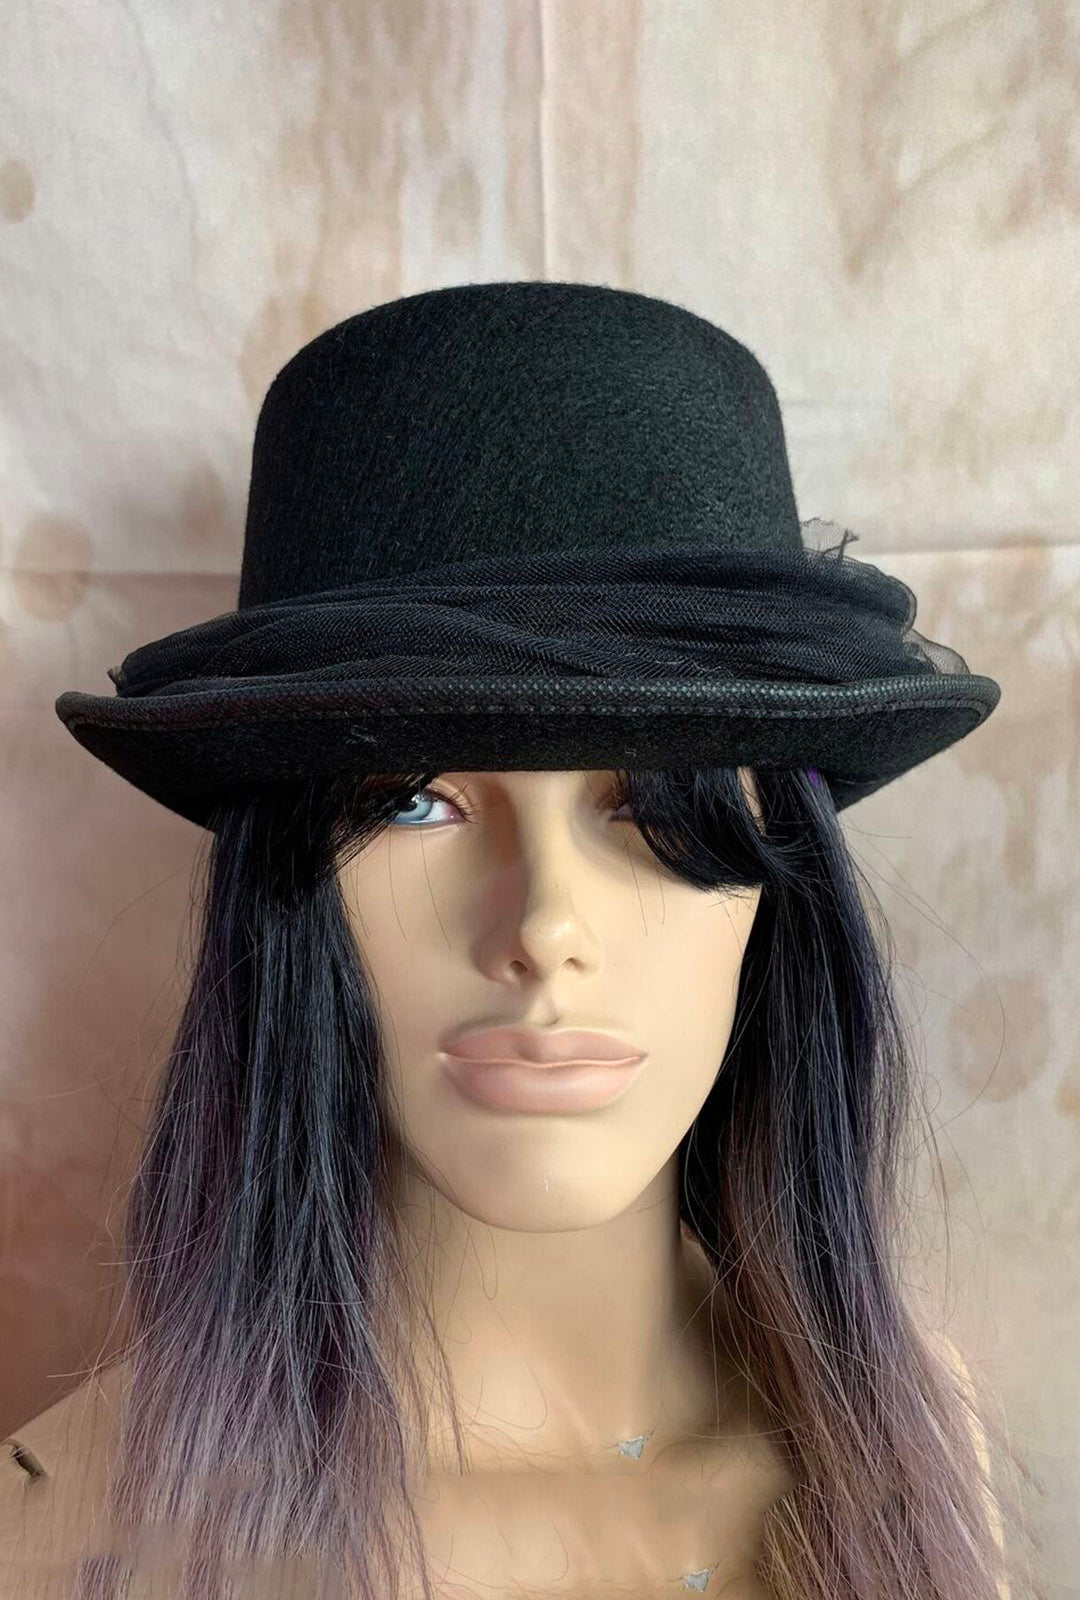 Black Top Hat with Tulle (BB)